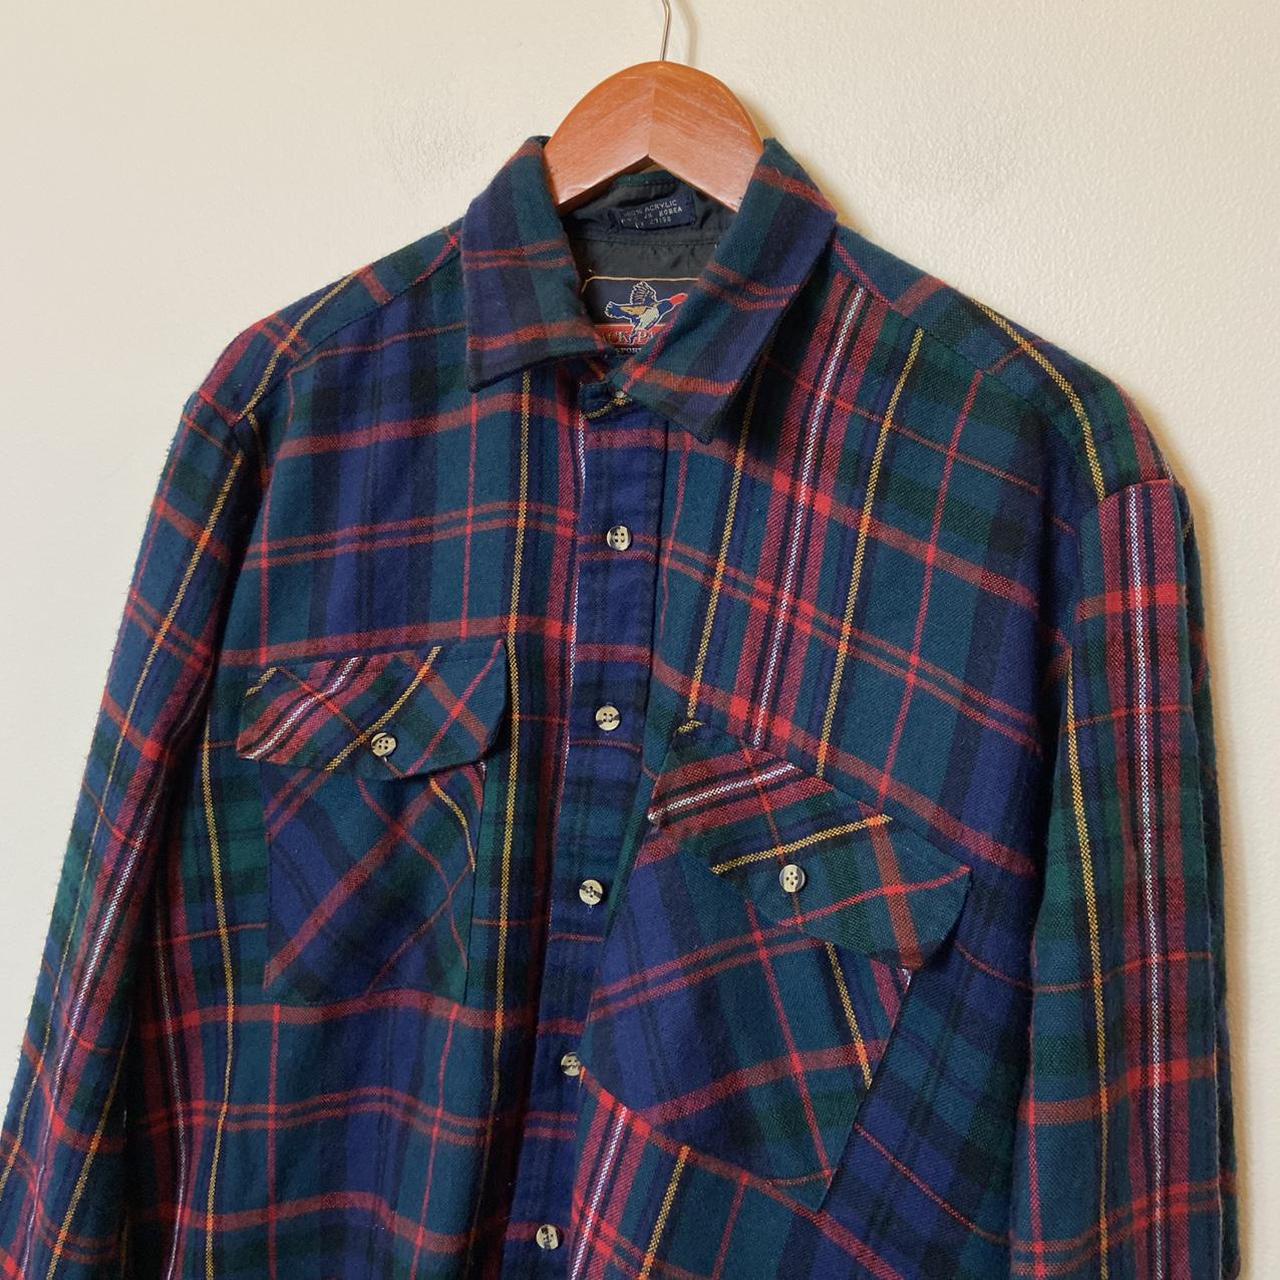 Product Image 2 - VINTAGE 1980s 1990s FLANNEL SHIRT